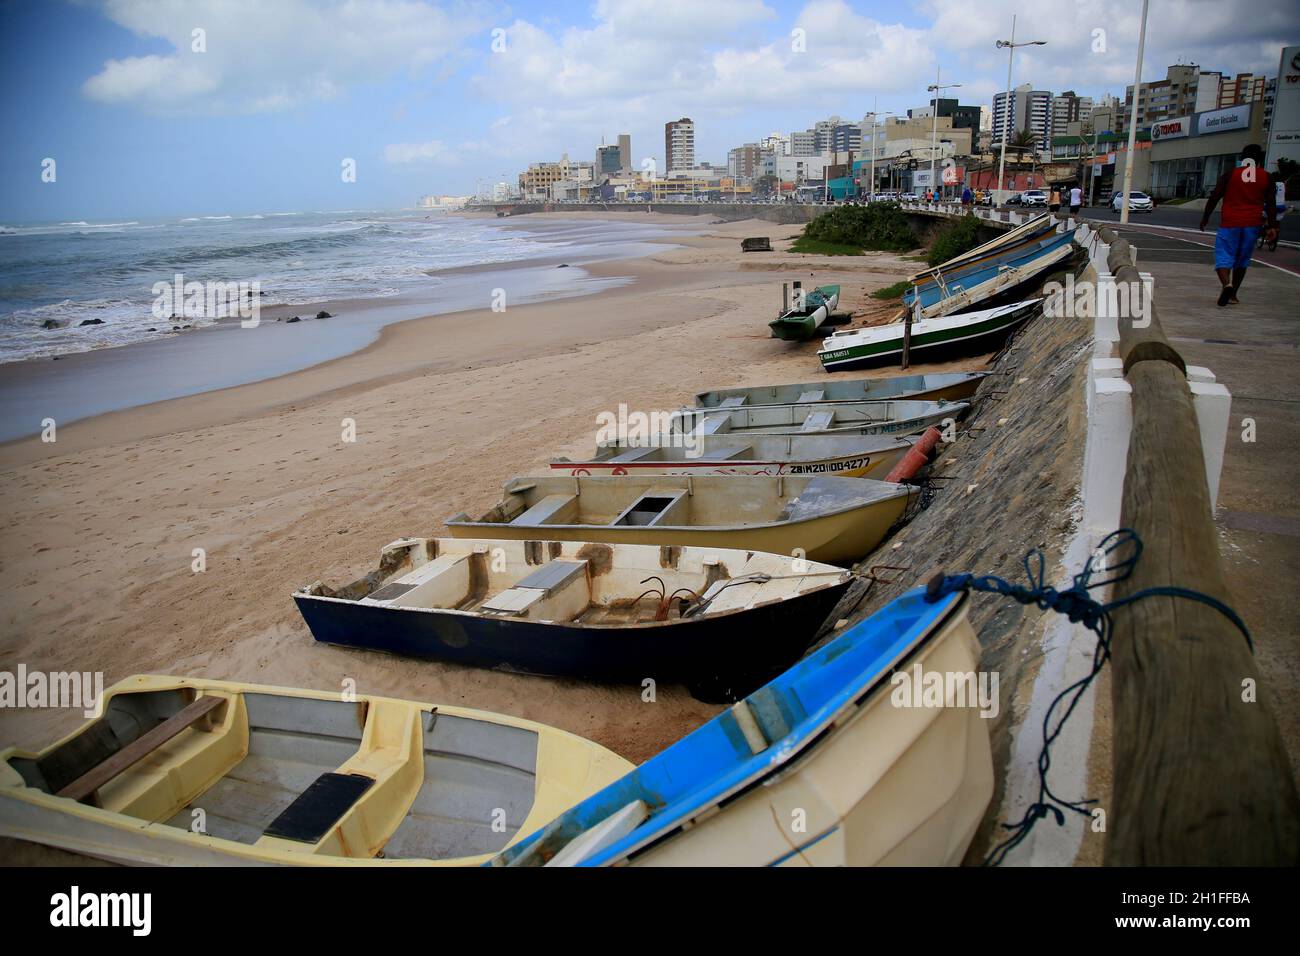 salvador, bahia / brazil - November 5, 2019: Boats are seen docked near the Fisherman's Colony in the Pituba neighborhood. Due to oil spill in the Bra Stock Photo